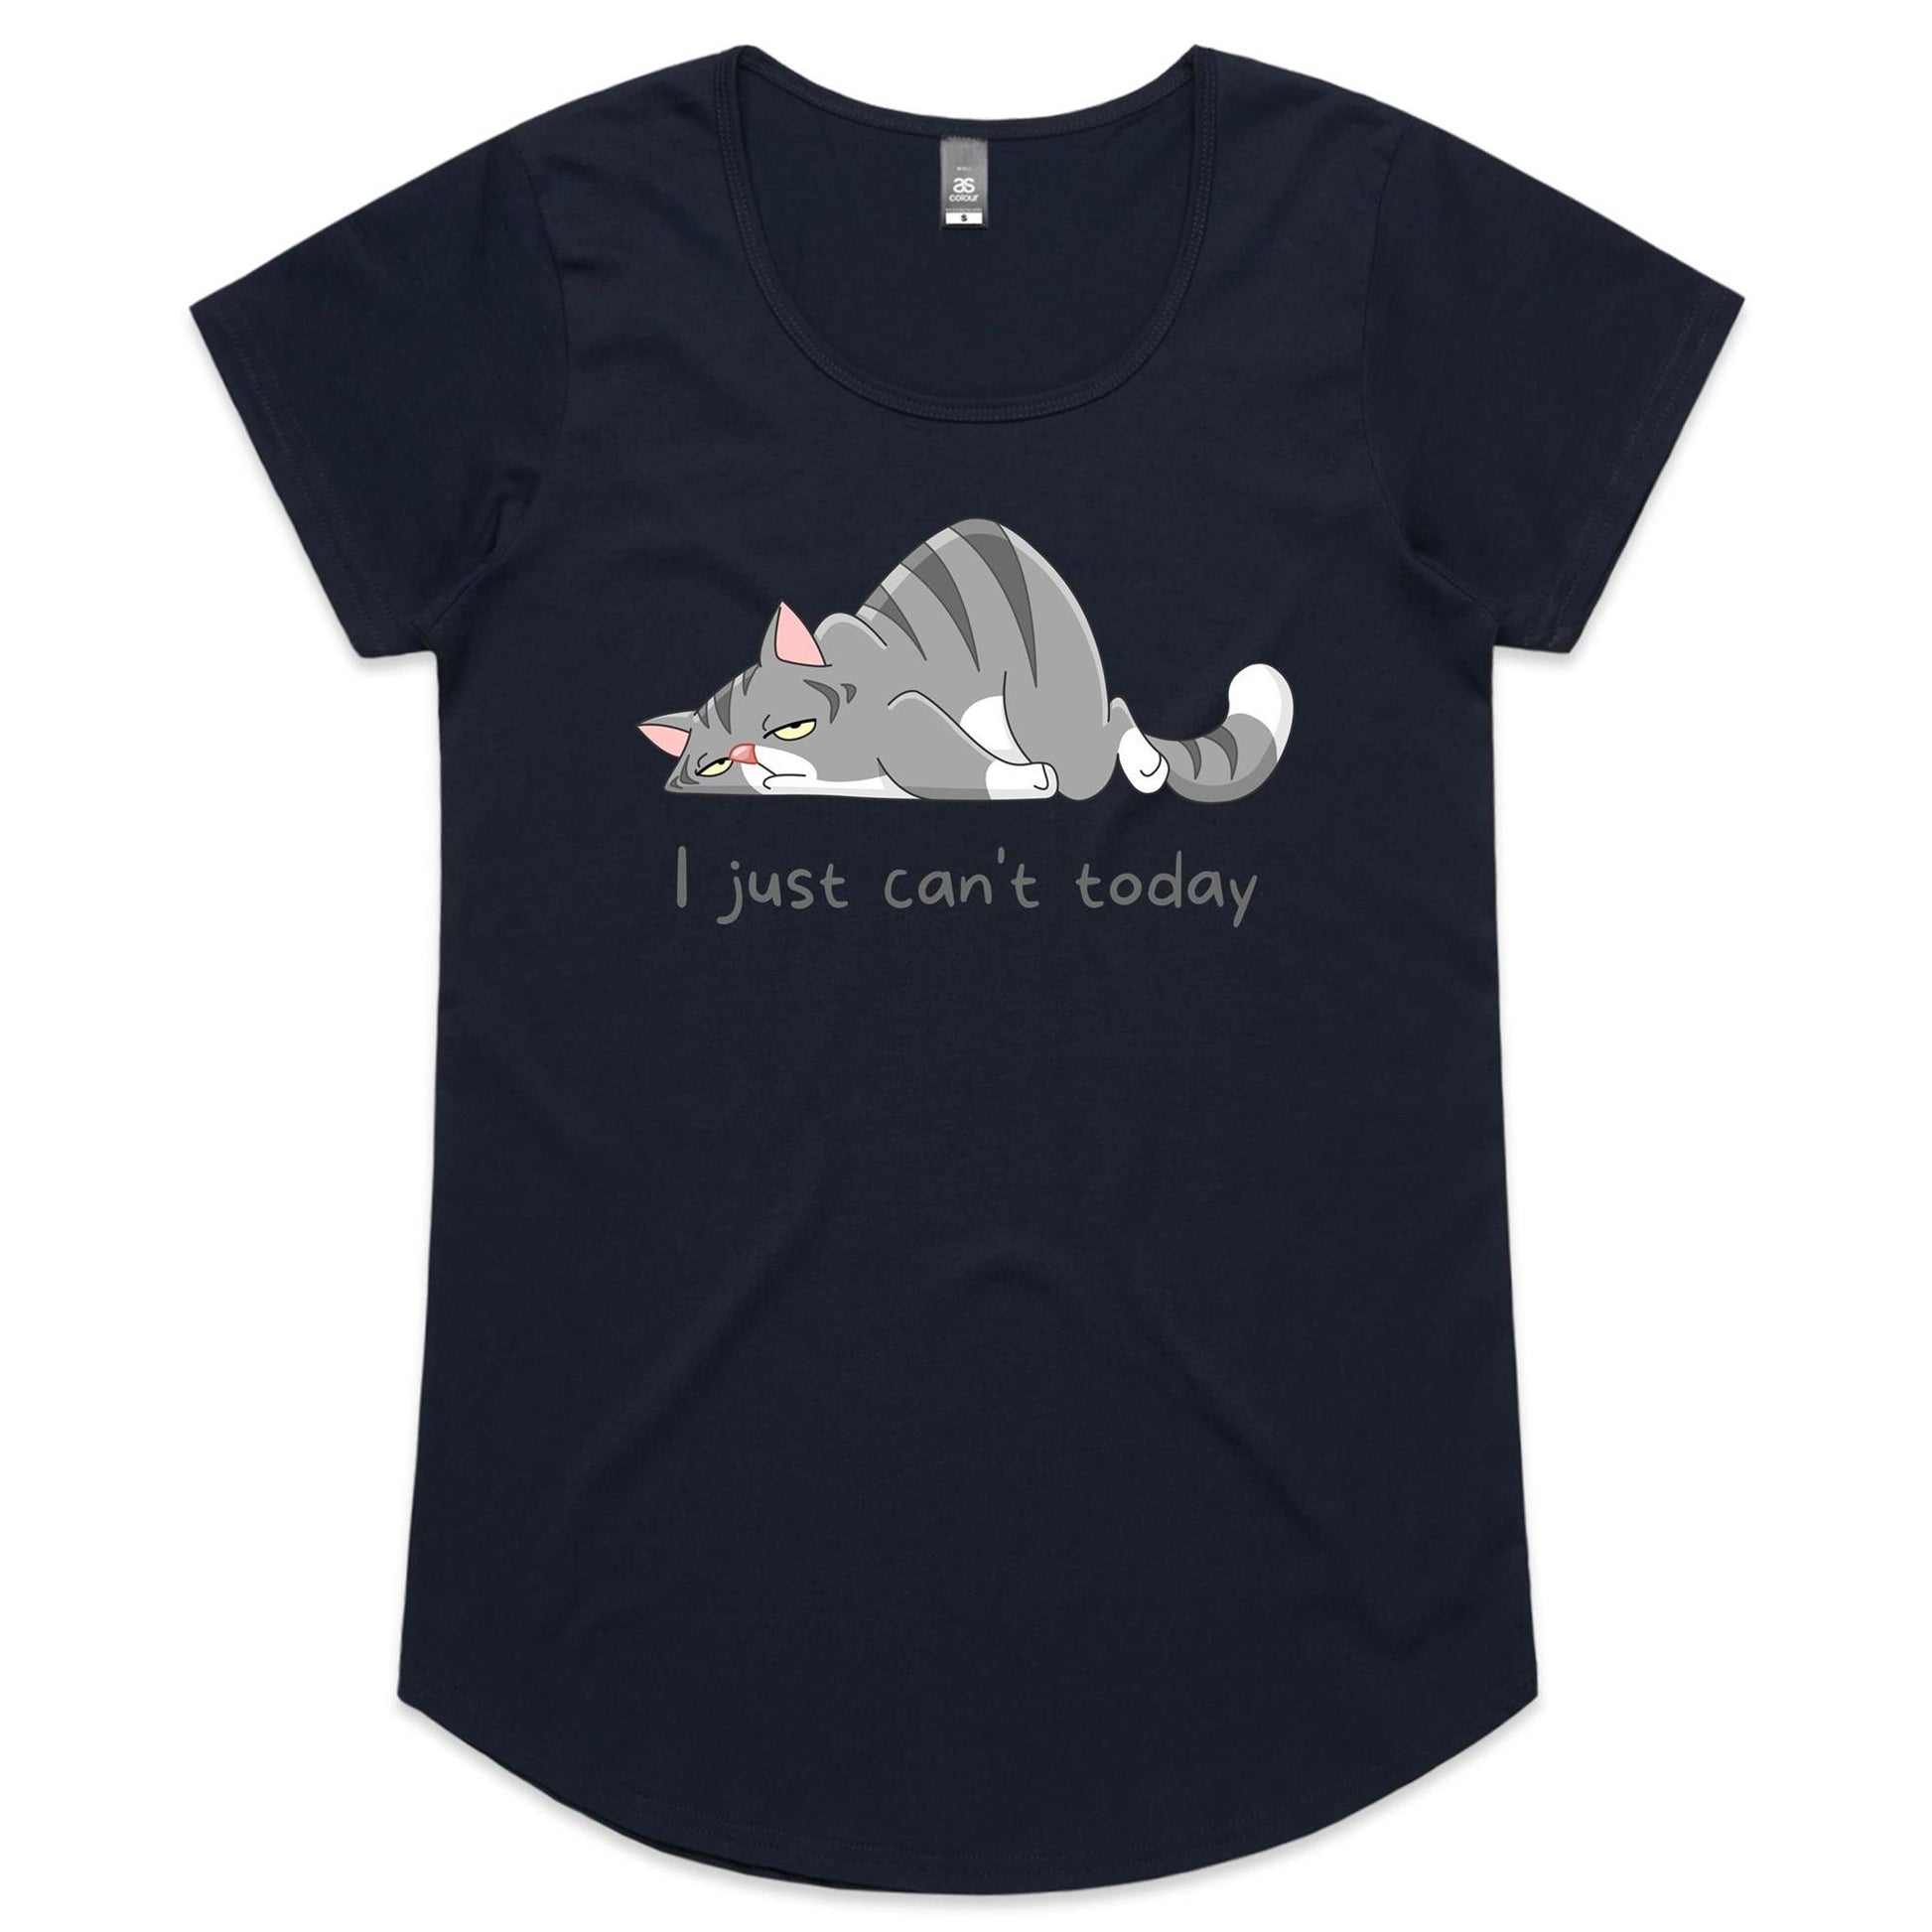 Cat, I Just Can't Today - Womens Scoop Neck T-Shirt Navy Womens Scoop Neck T-shirt animal